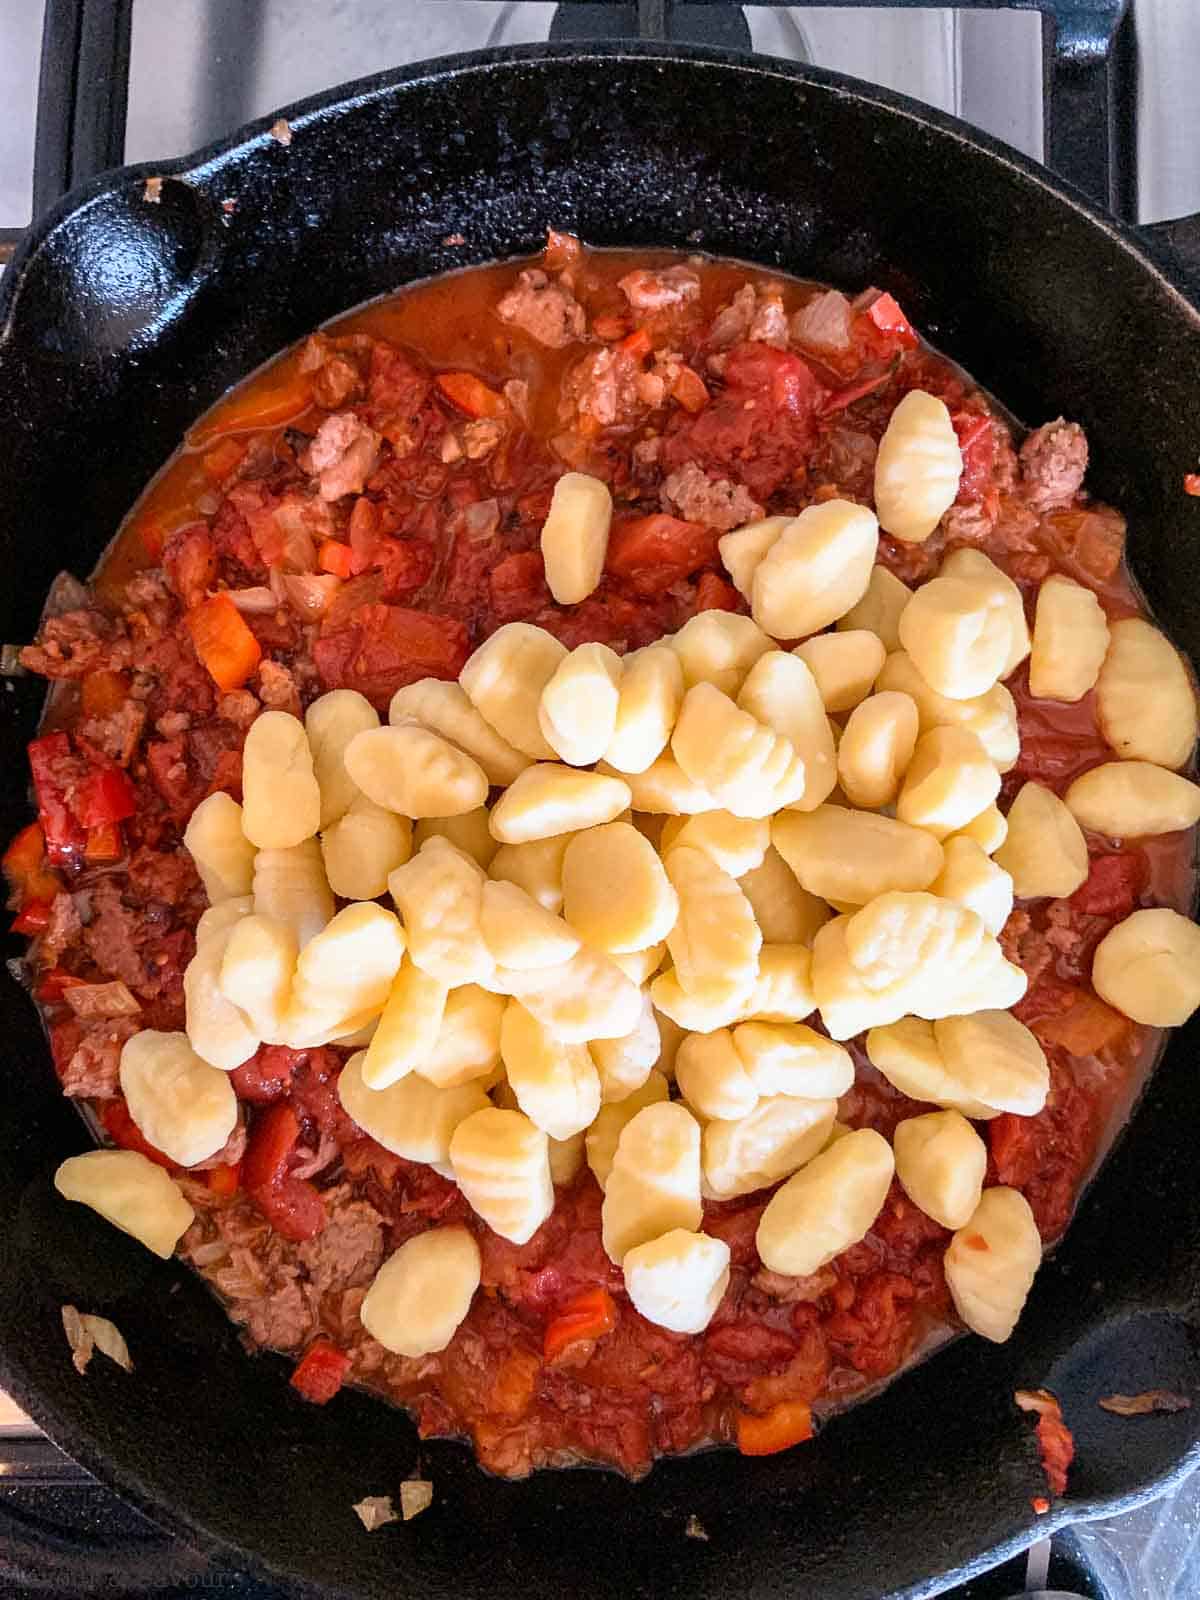 adding gnocchi to tomato and plant-based meat in a cast iron skillet.